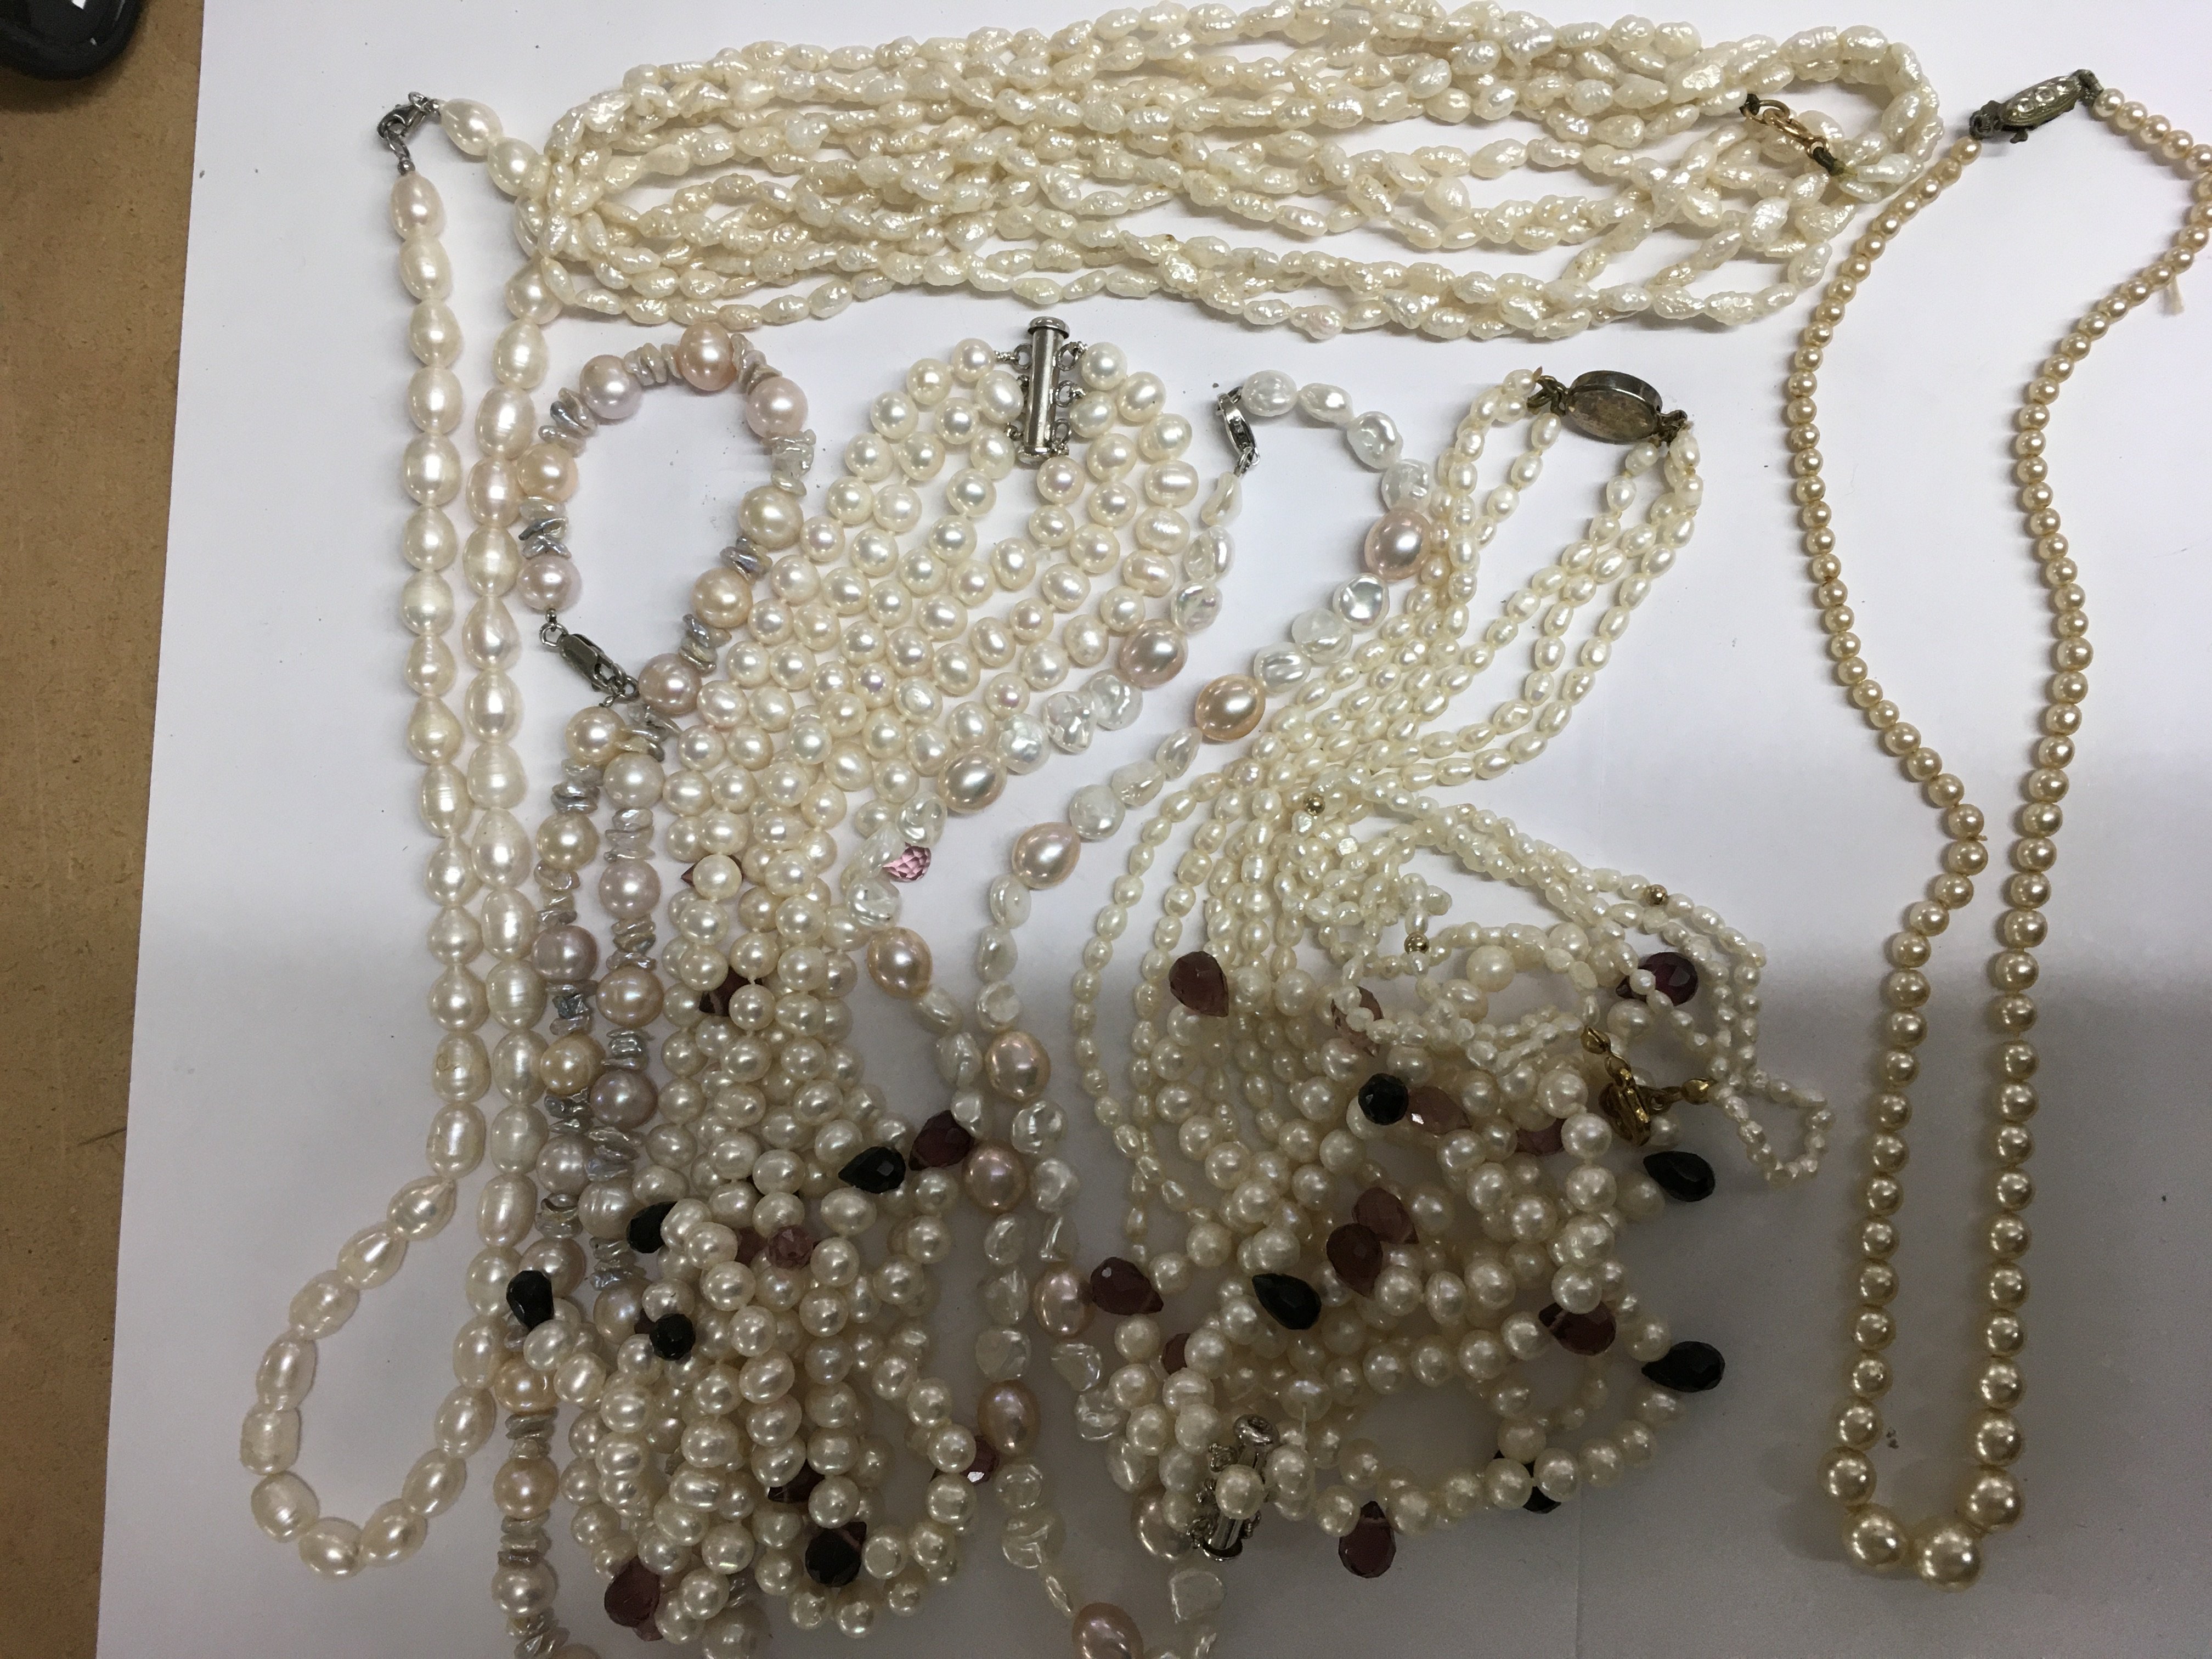 A collection of pearl necklaces and bracelets (9).